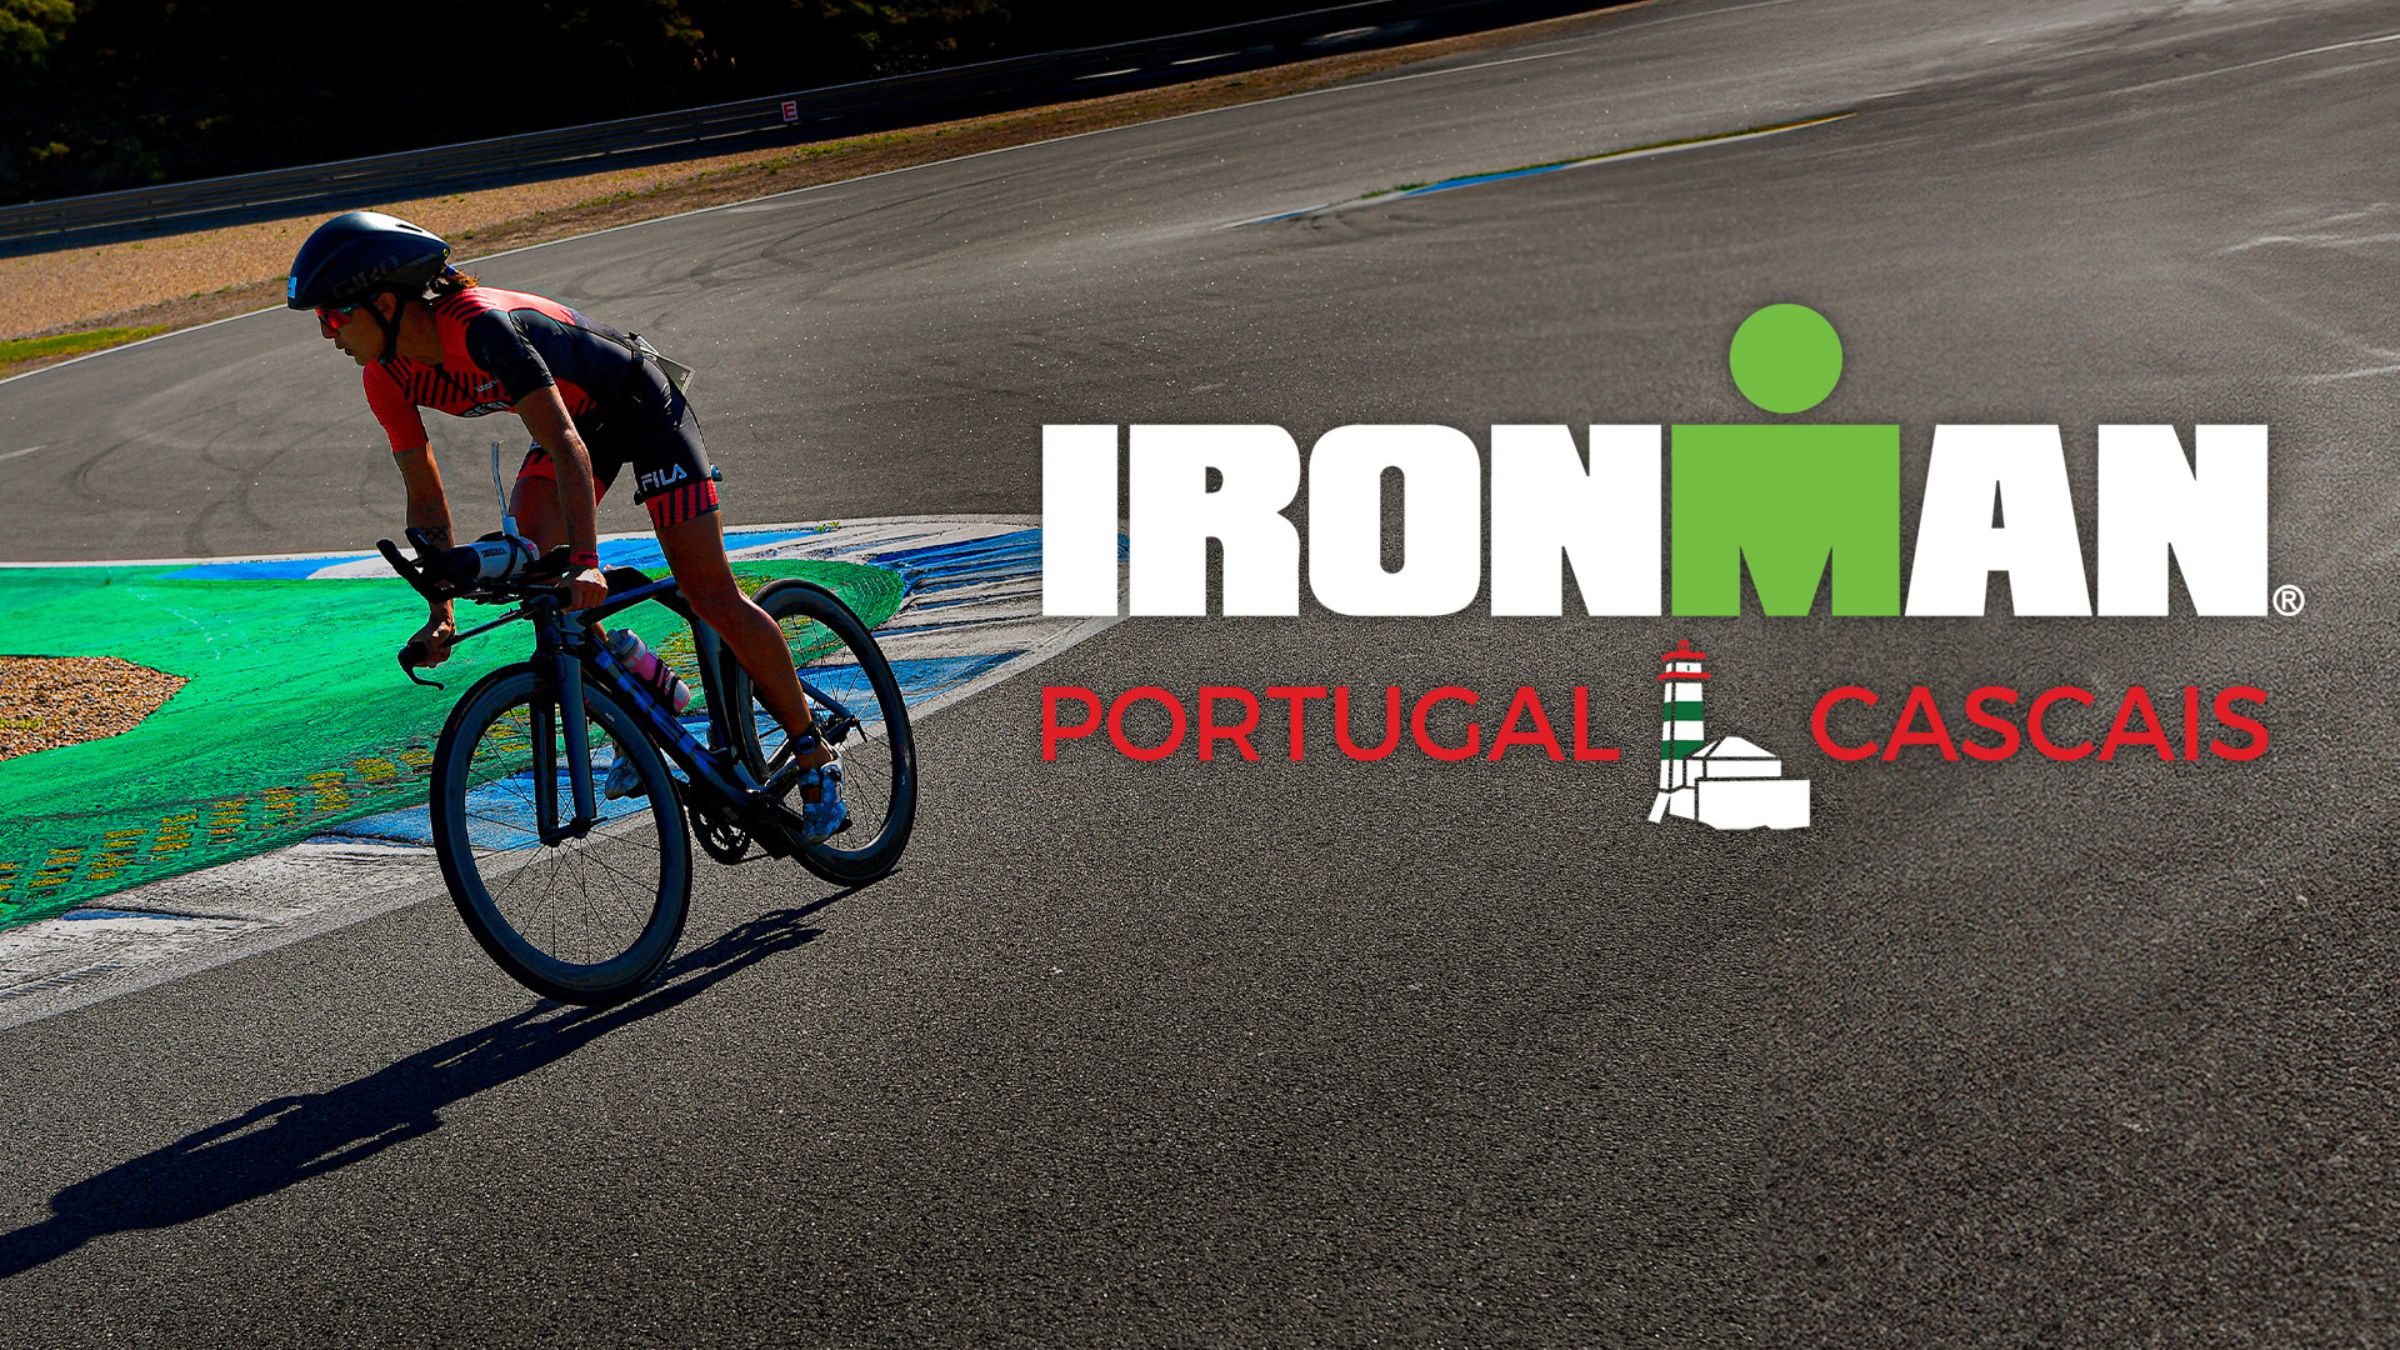 How to Watch the Free Ironman Portugal Livestream